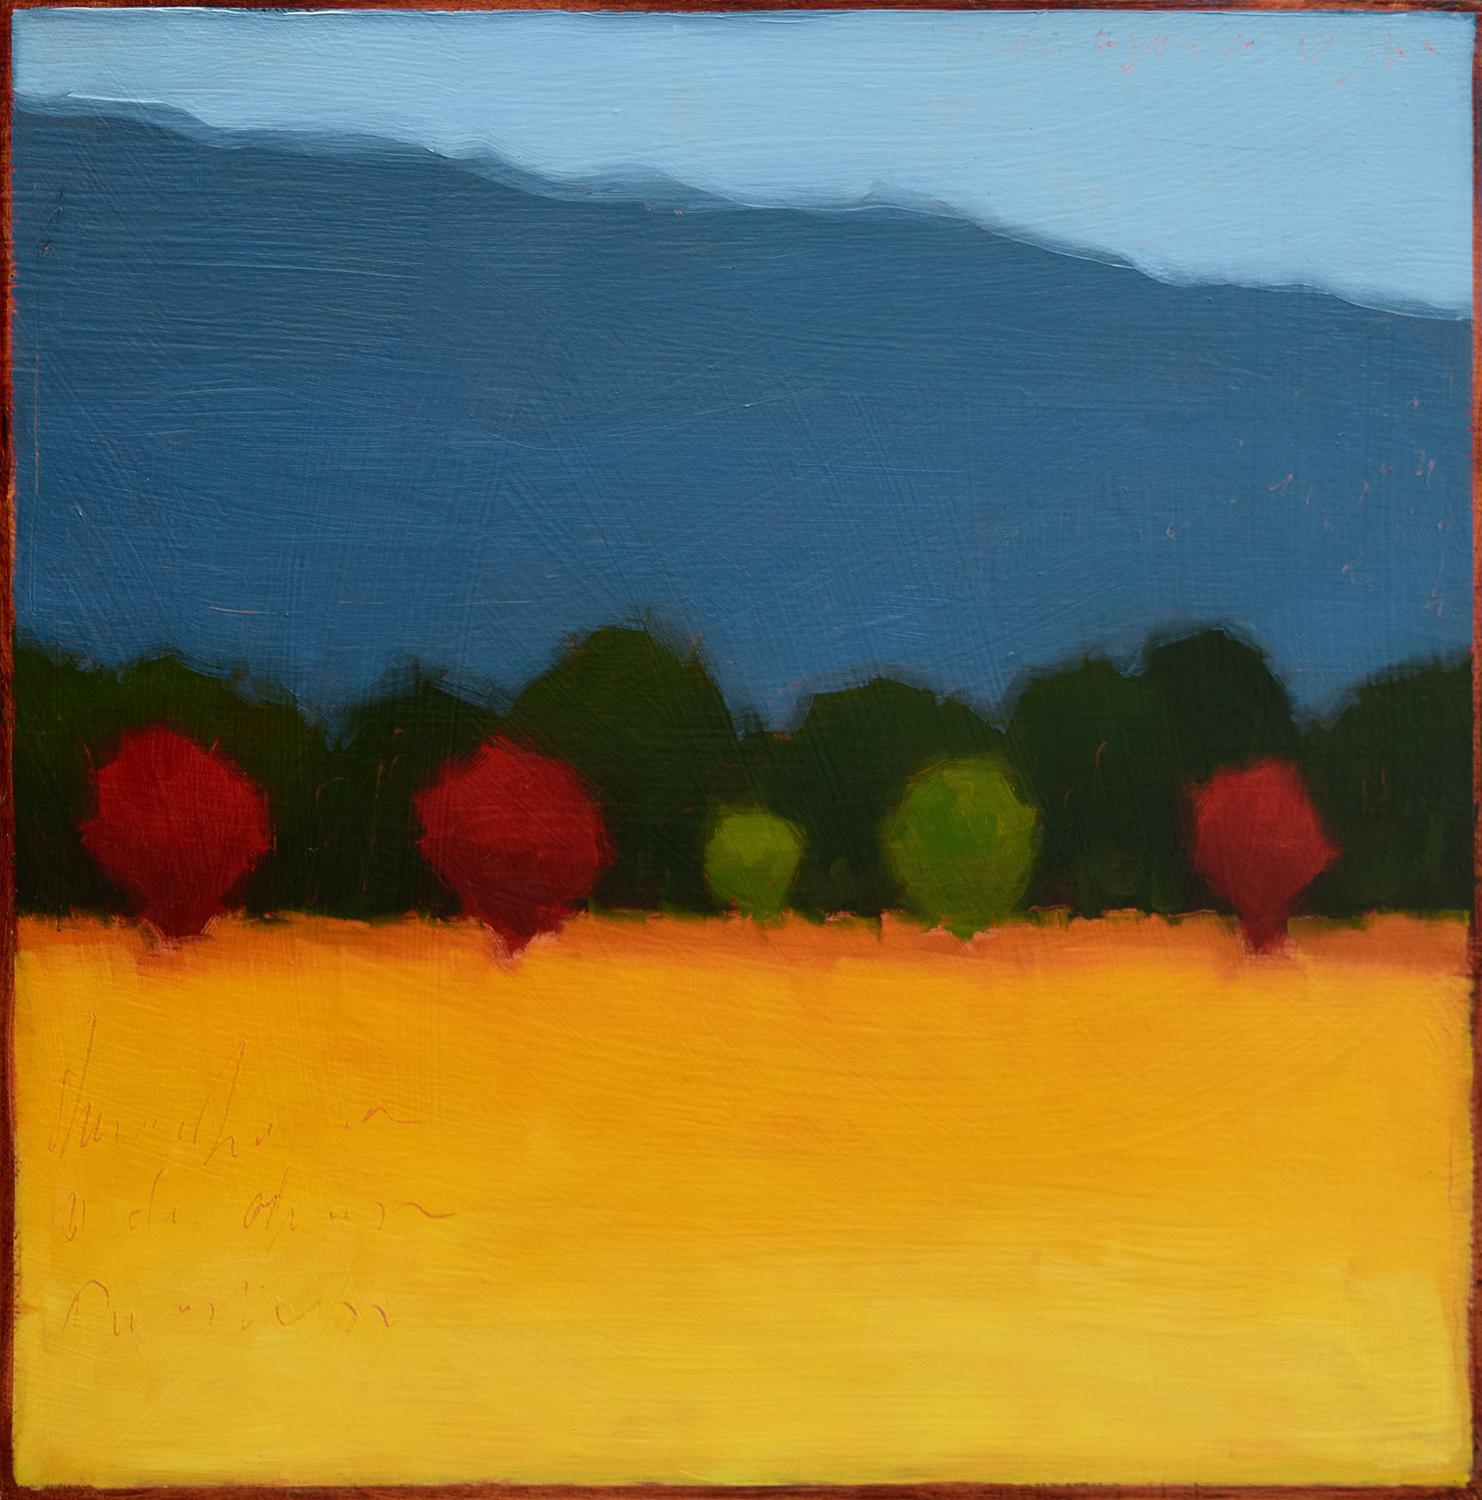 Tracy Helgeson Figurative Painting - Bright Field (Color Field Painting of a Rural Landscape in Autumn)